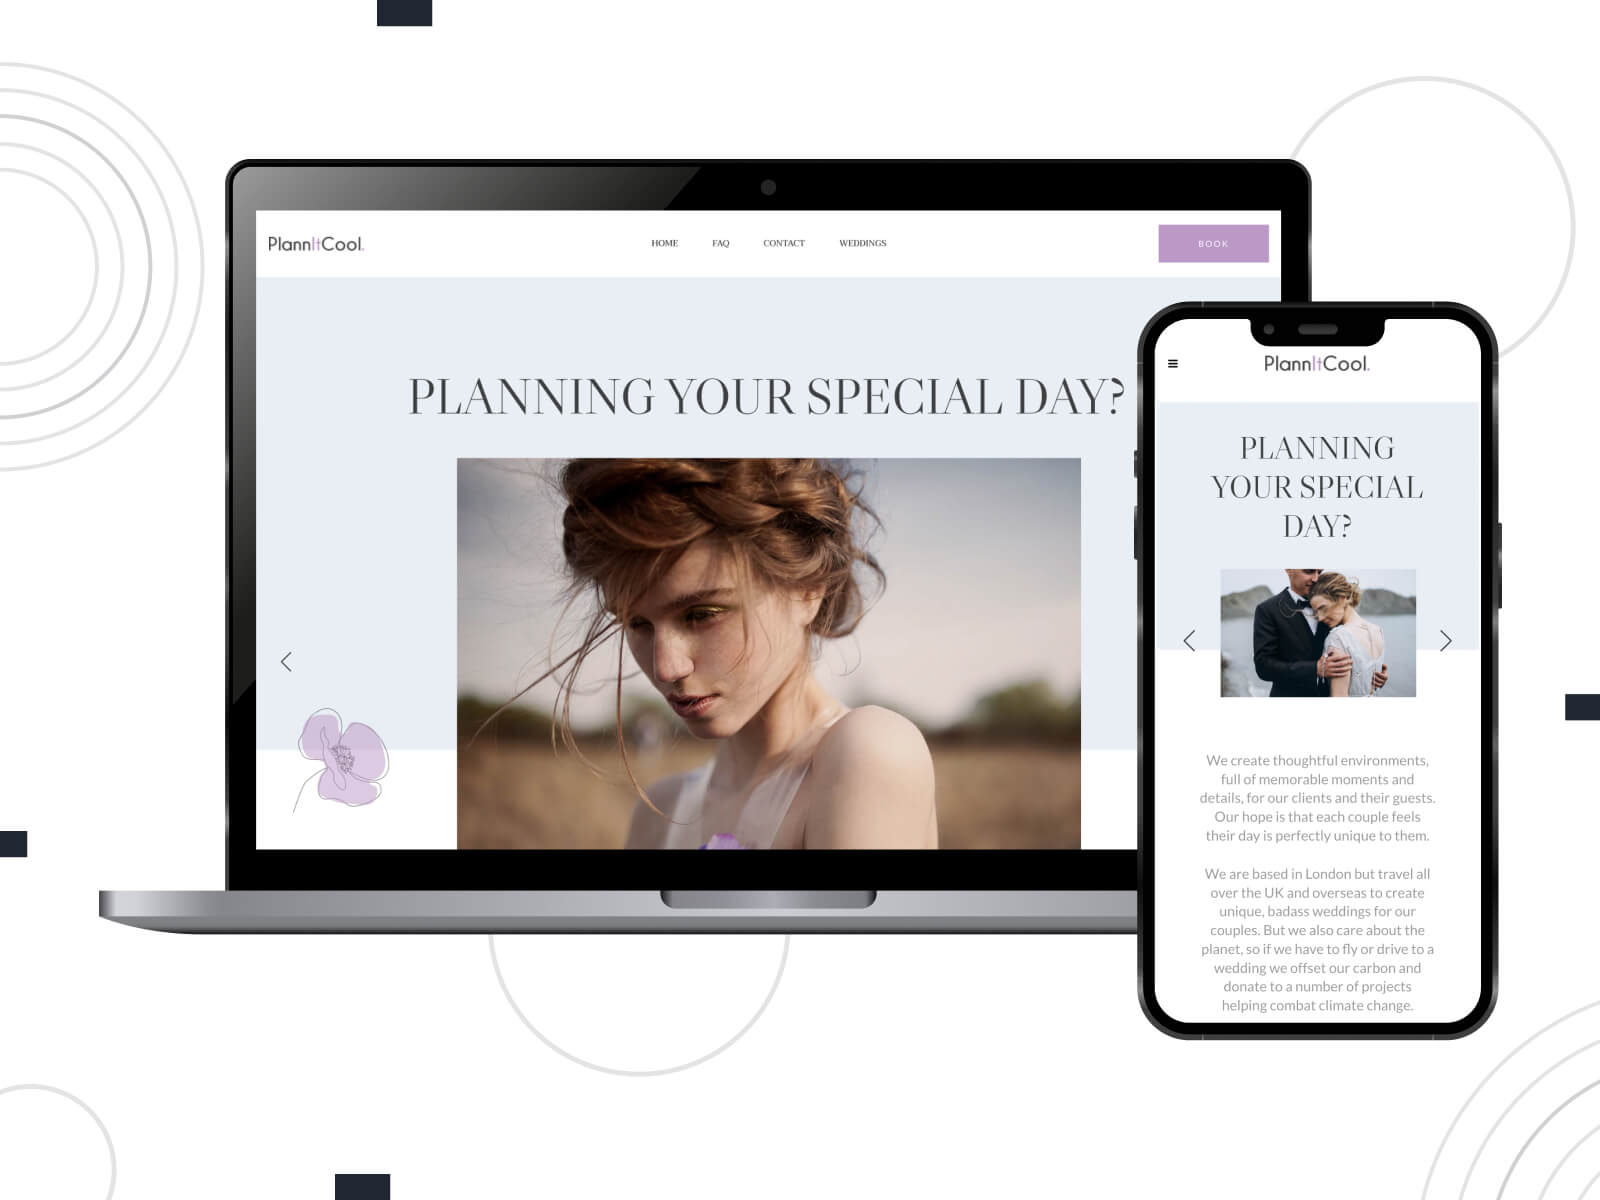 Illustration of Bridge - luminous, calm, sophisticated WordPress templates, ideal for high-end wedding ceremonies in dim gray, gray, and rosy brown color combination.